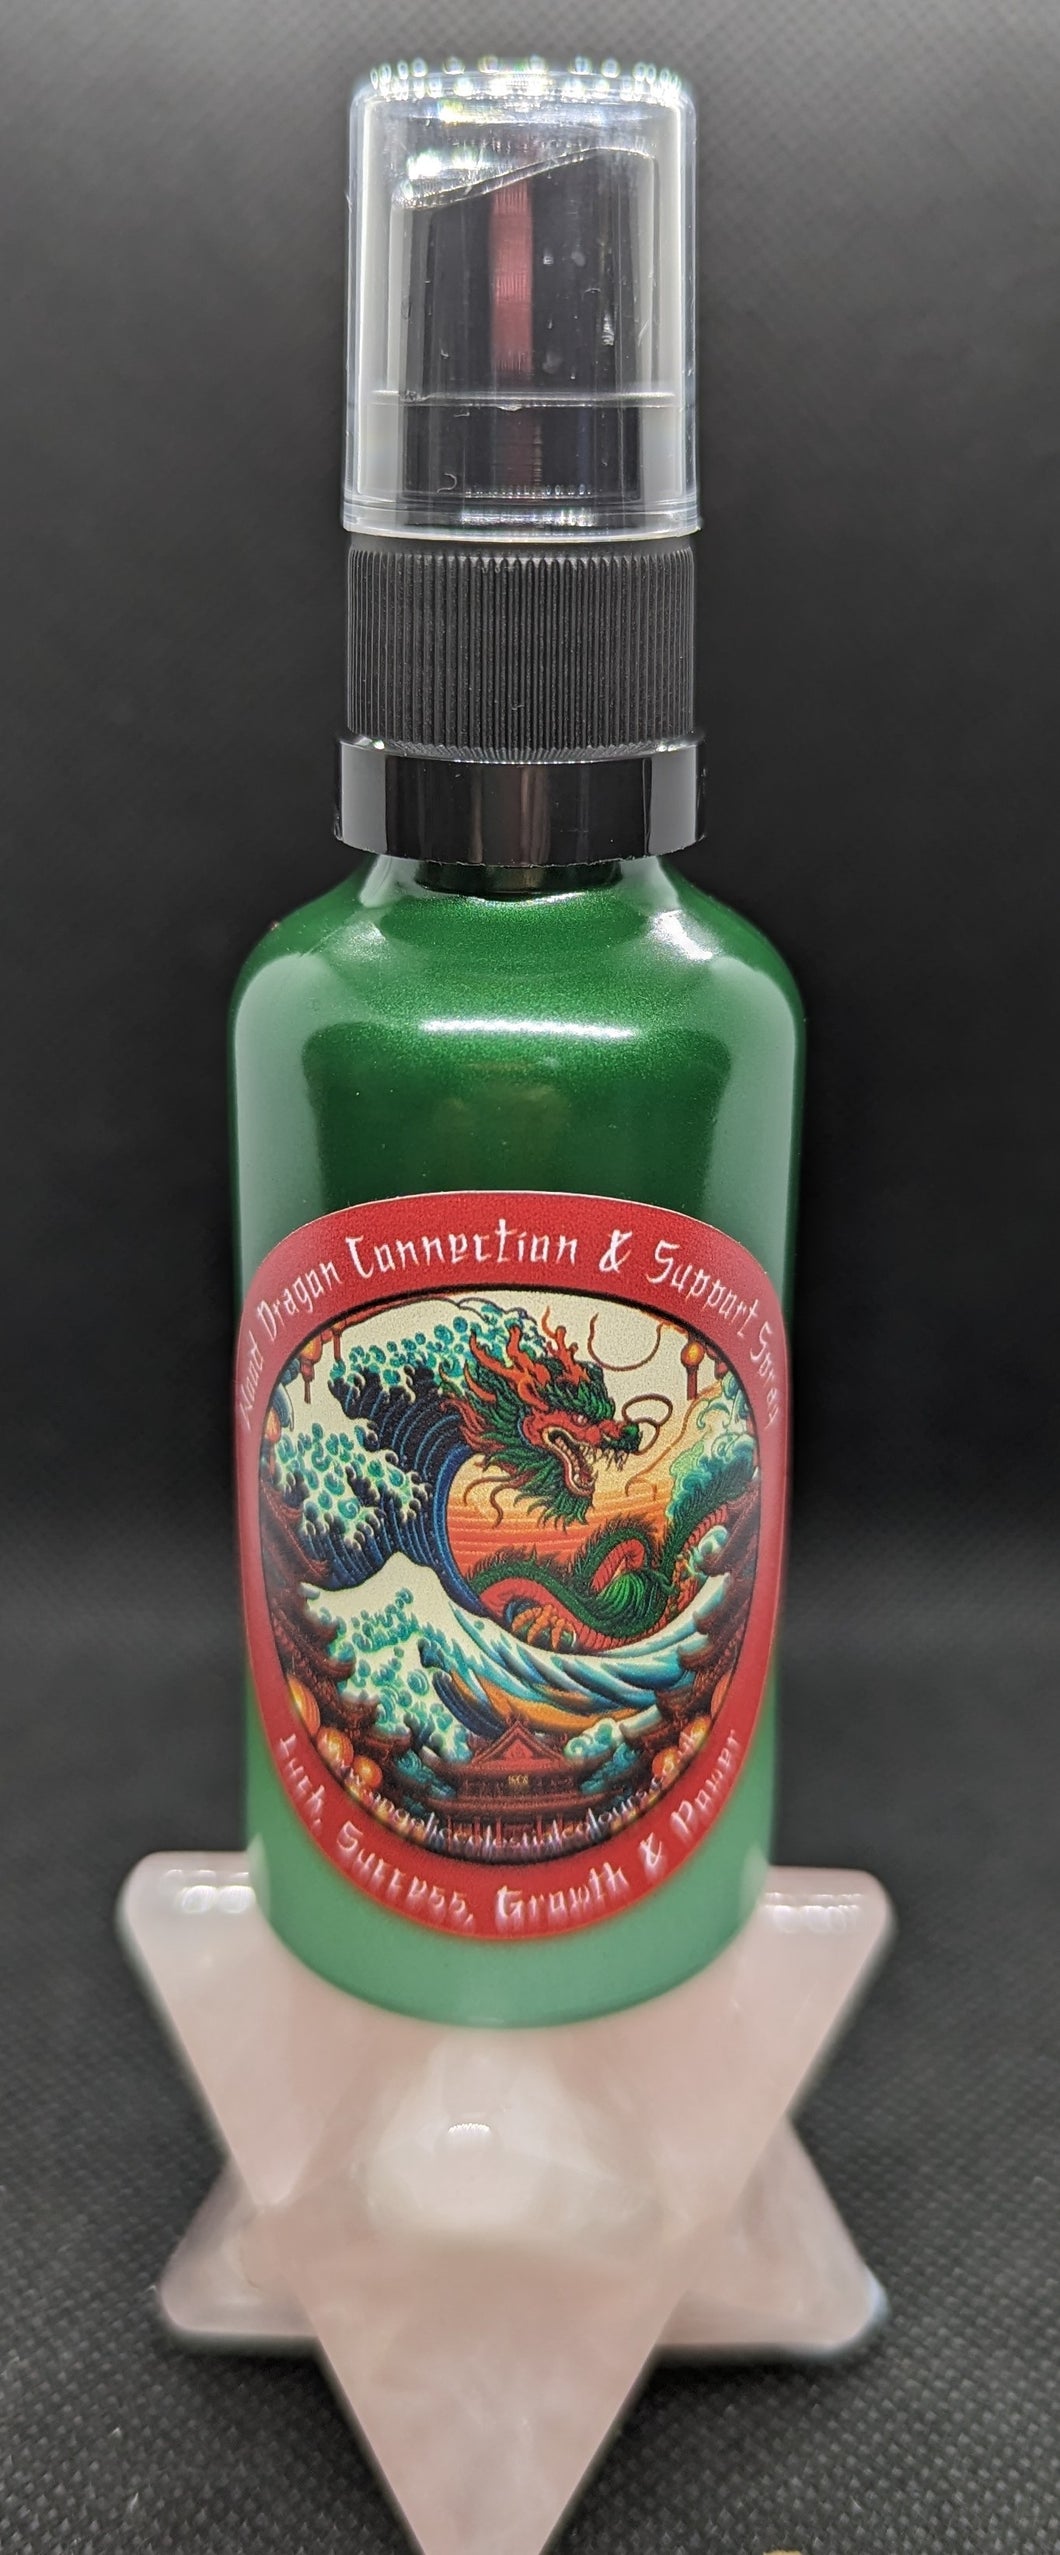 Wood Dragon Connection & Support Spray - Luck, Success, Growth & Power